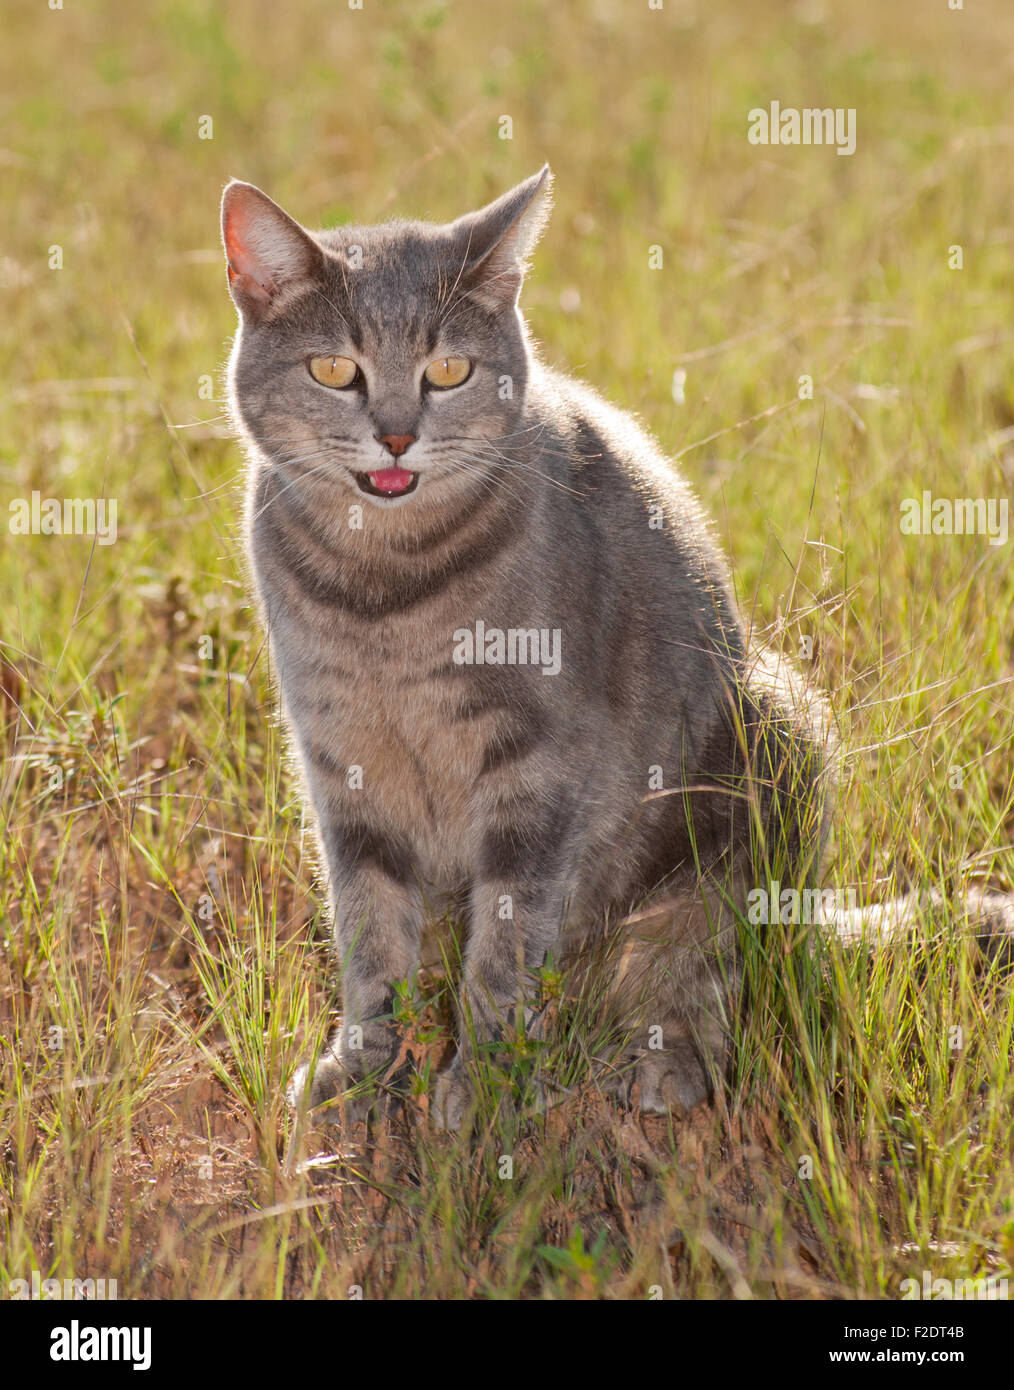 Beautiful blue tabby cat in grass back lit by sun Stock Photo